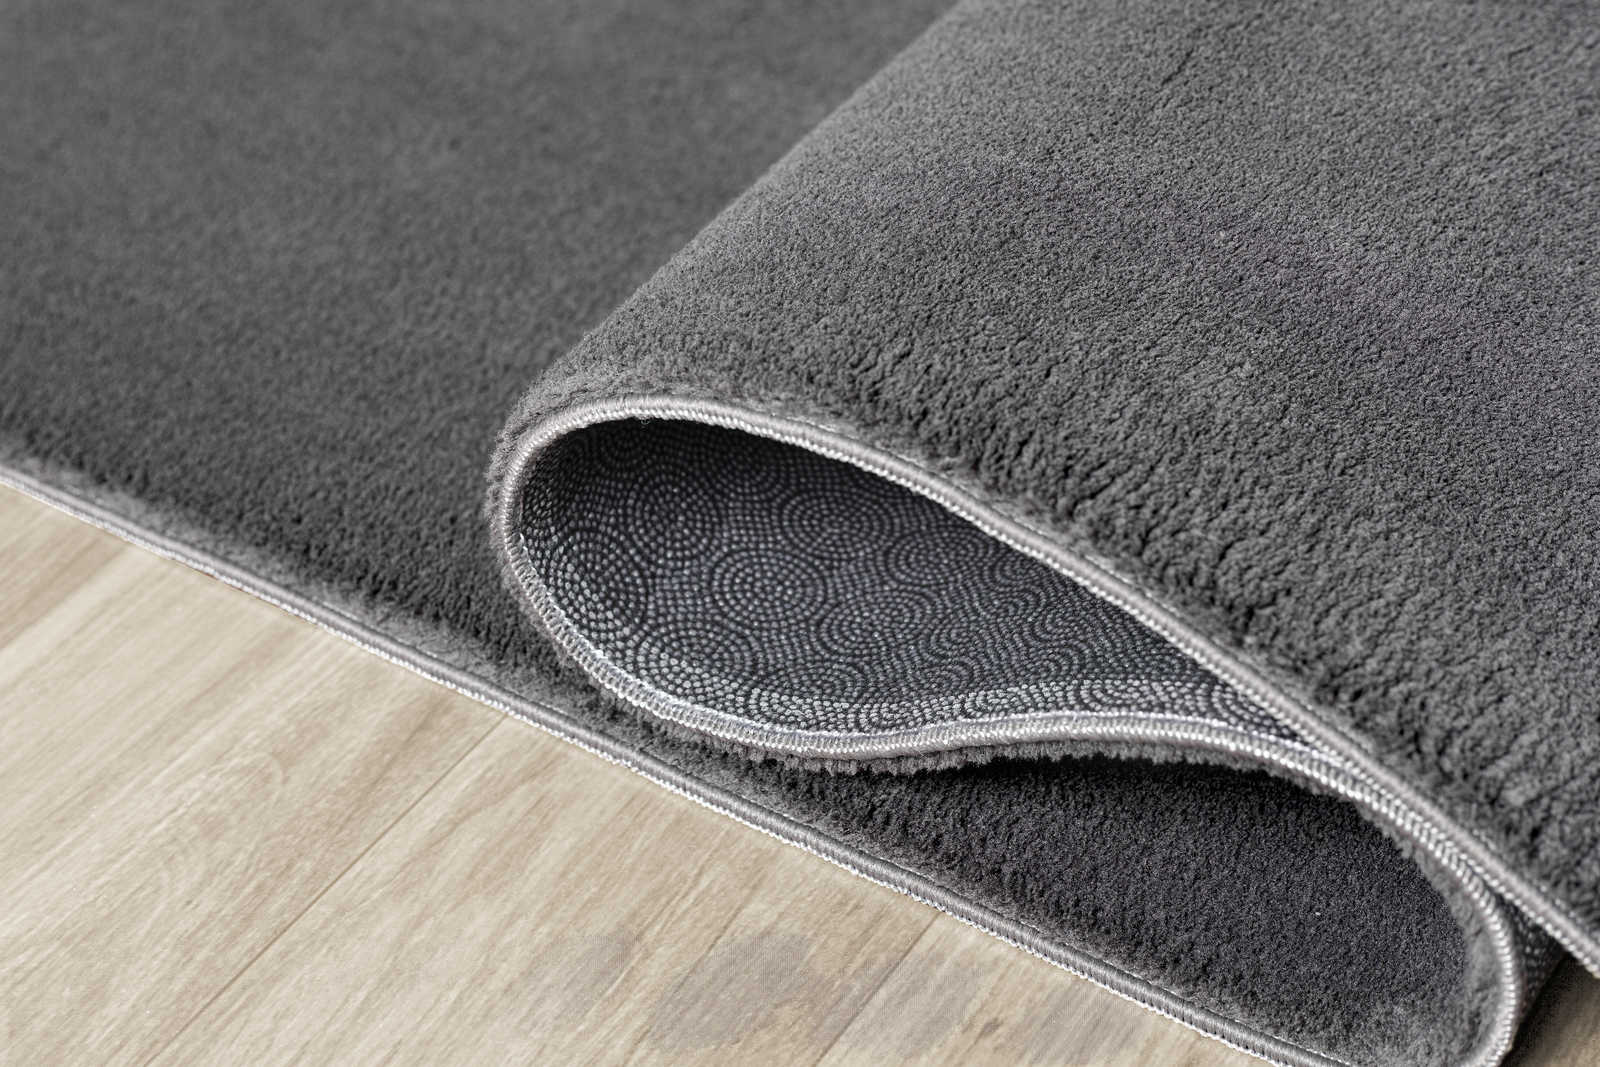             Fluffy high pile carpet in anthracite - 150 x 80 cm
        